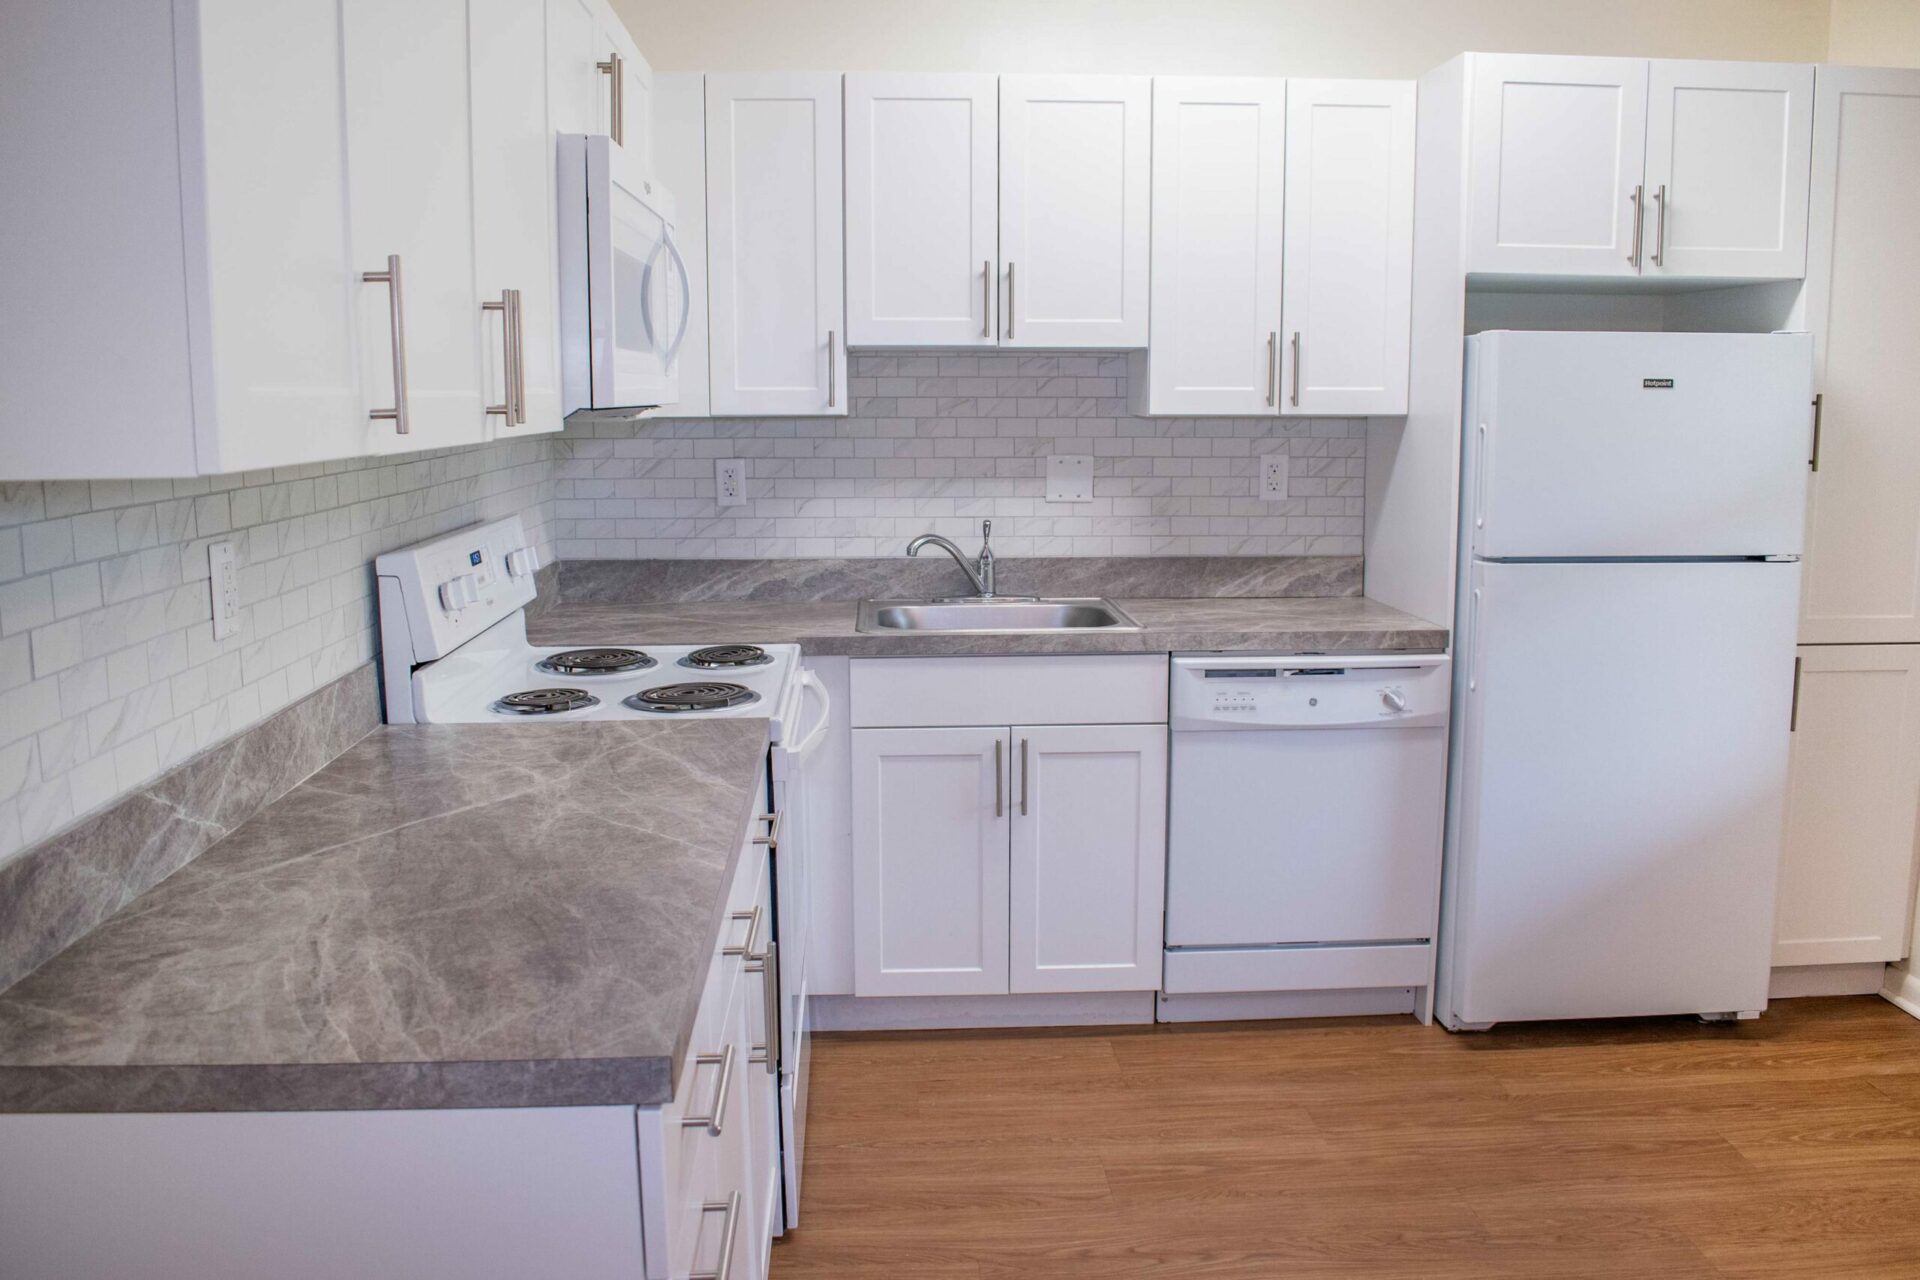 Westover Village Apartments kitchen with white cabinets and white appliances